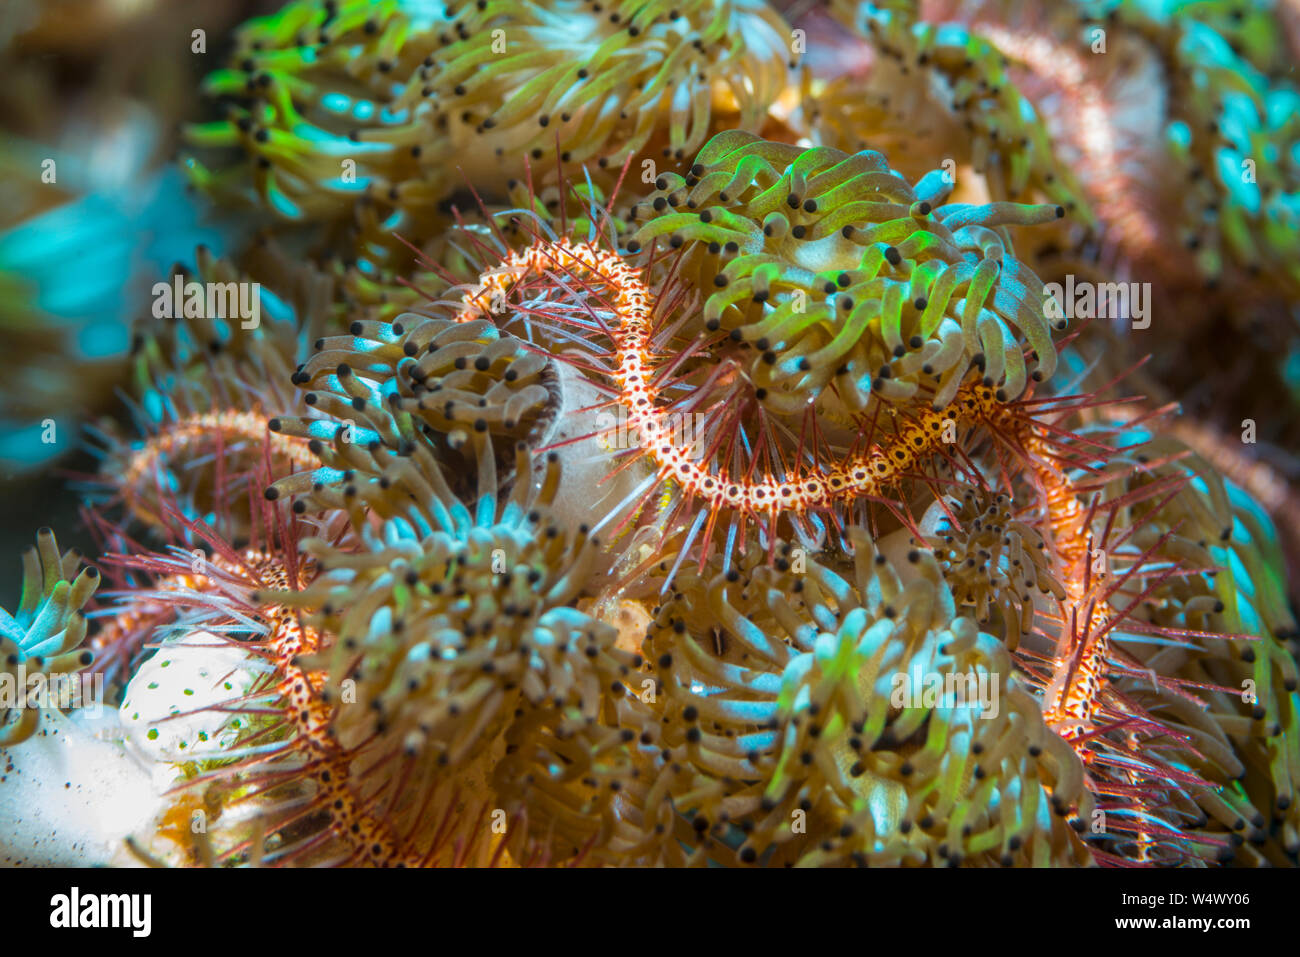 Dark red-spined brittle star [Ophiothrix purpurea] and Colonial anemones [Amphianthus nitidus].  North Sulawesi, Indonesia. Stock Photo